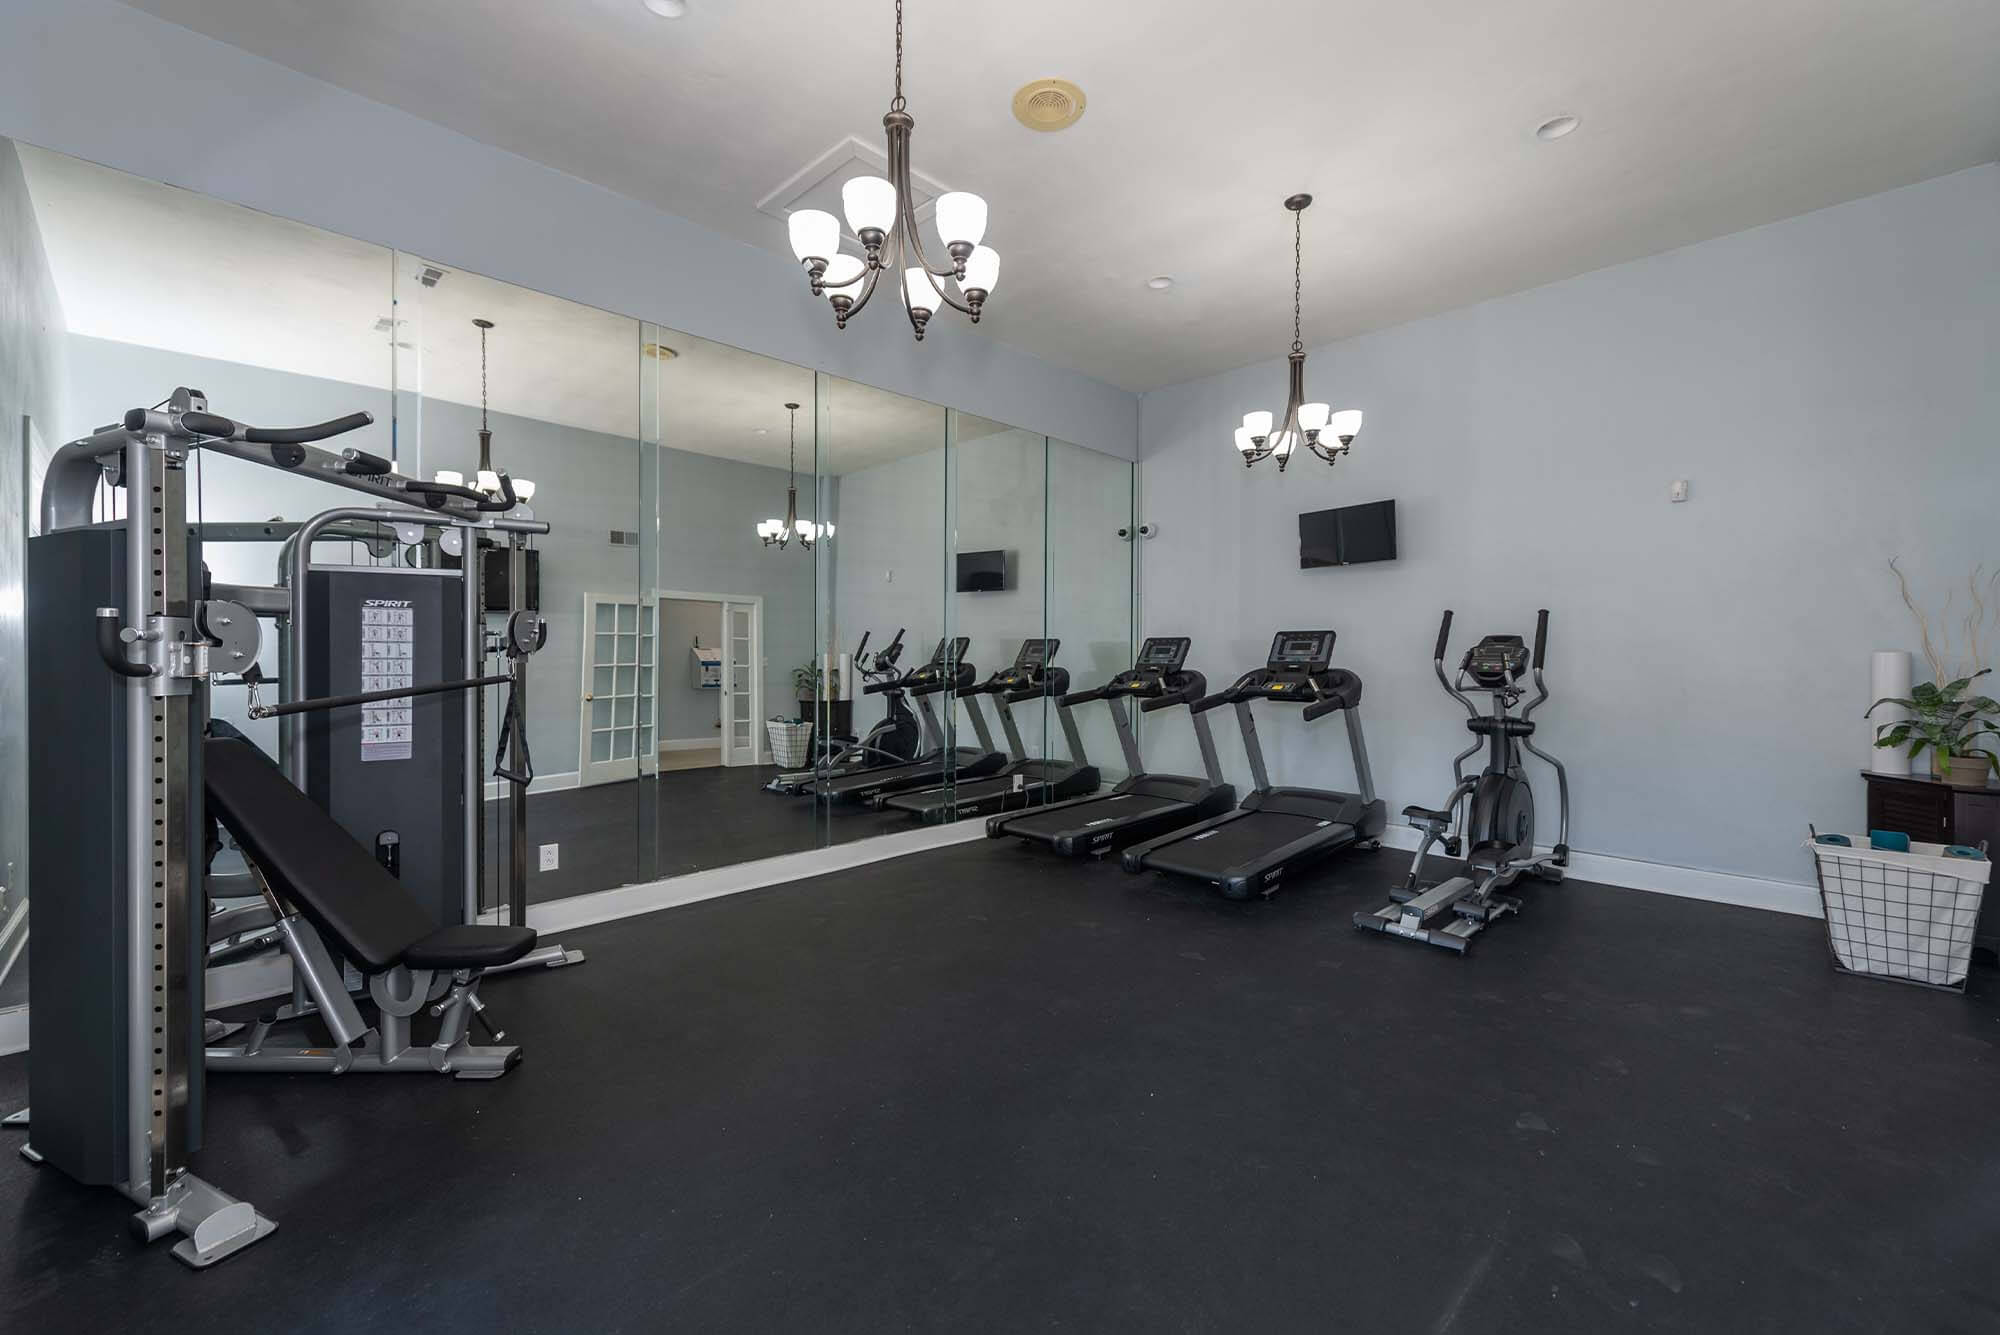 Fitness center at Reserves at Tidewater in Norfolk, Virginia